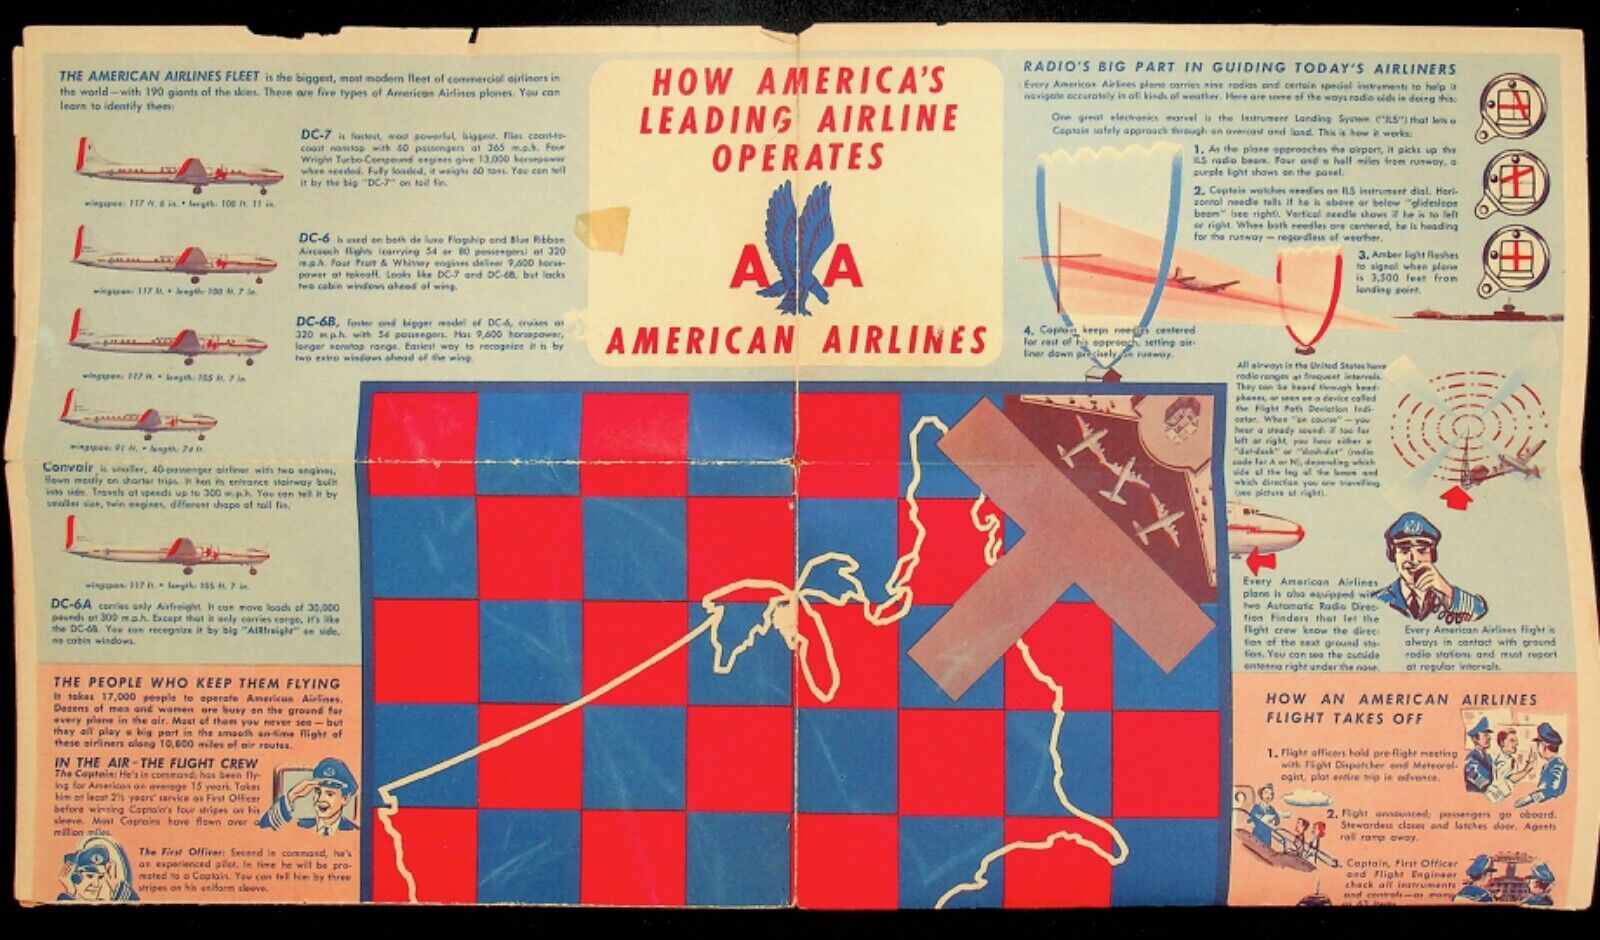 1955 AMERICAN AIRLINES GAME MAP OF DESTINATIONS & HOW THEY OPERATE - E15-J